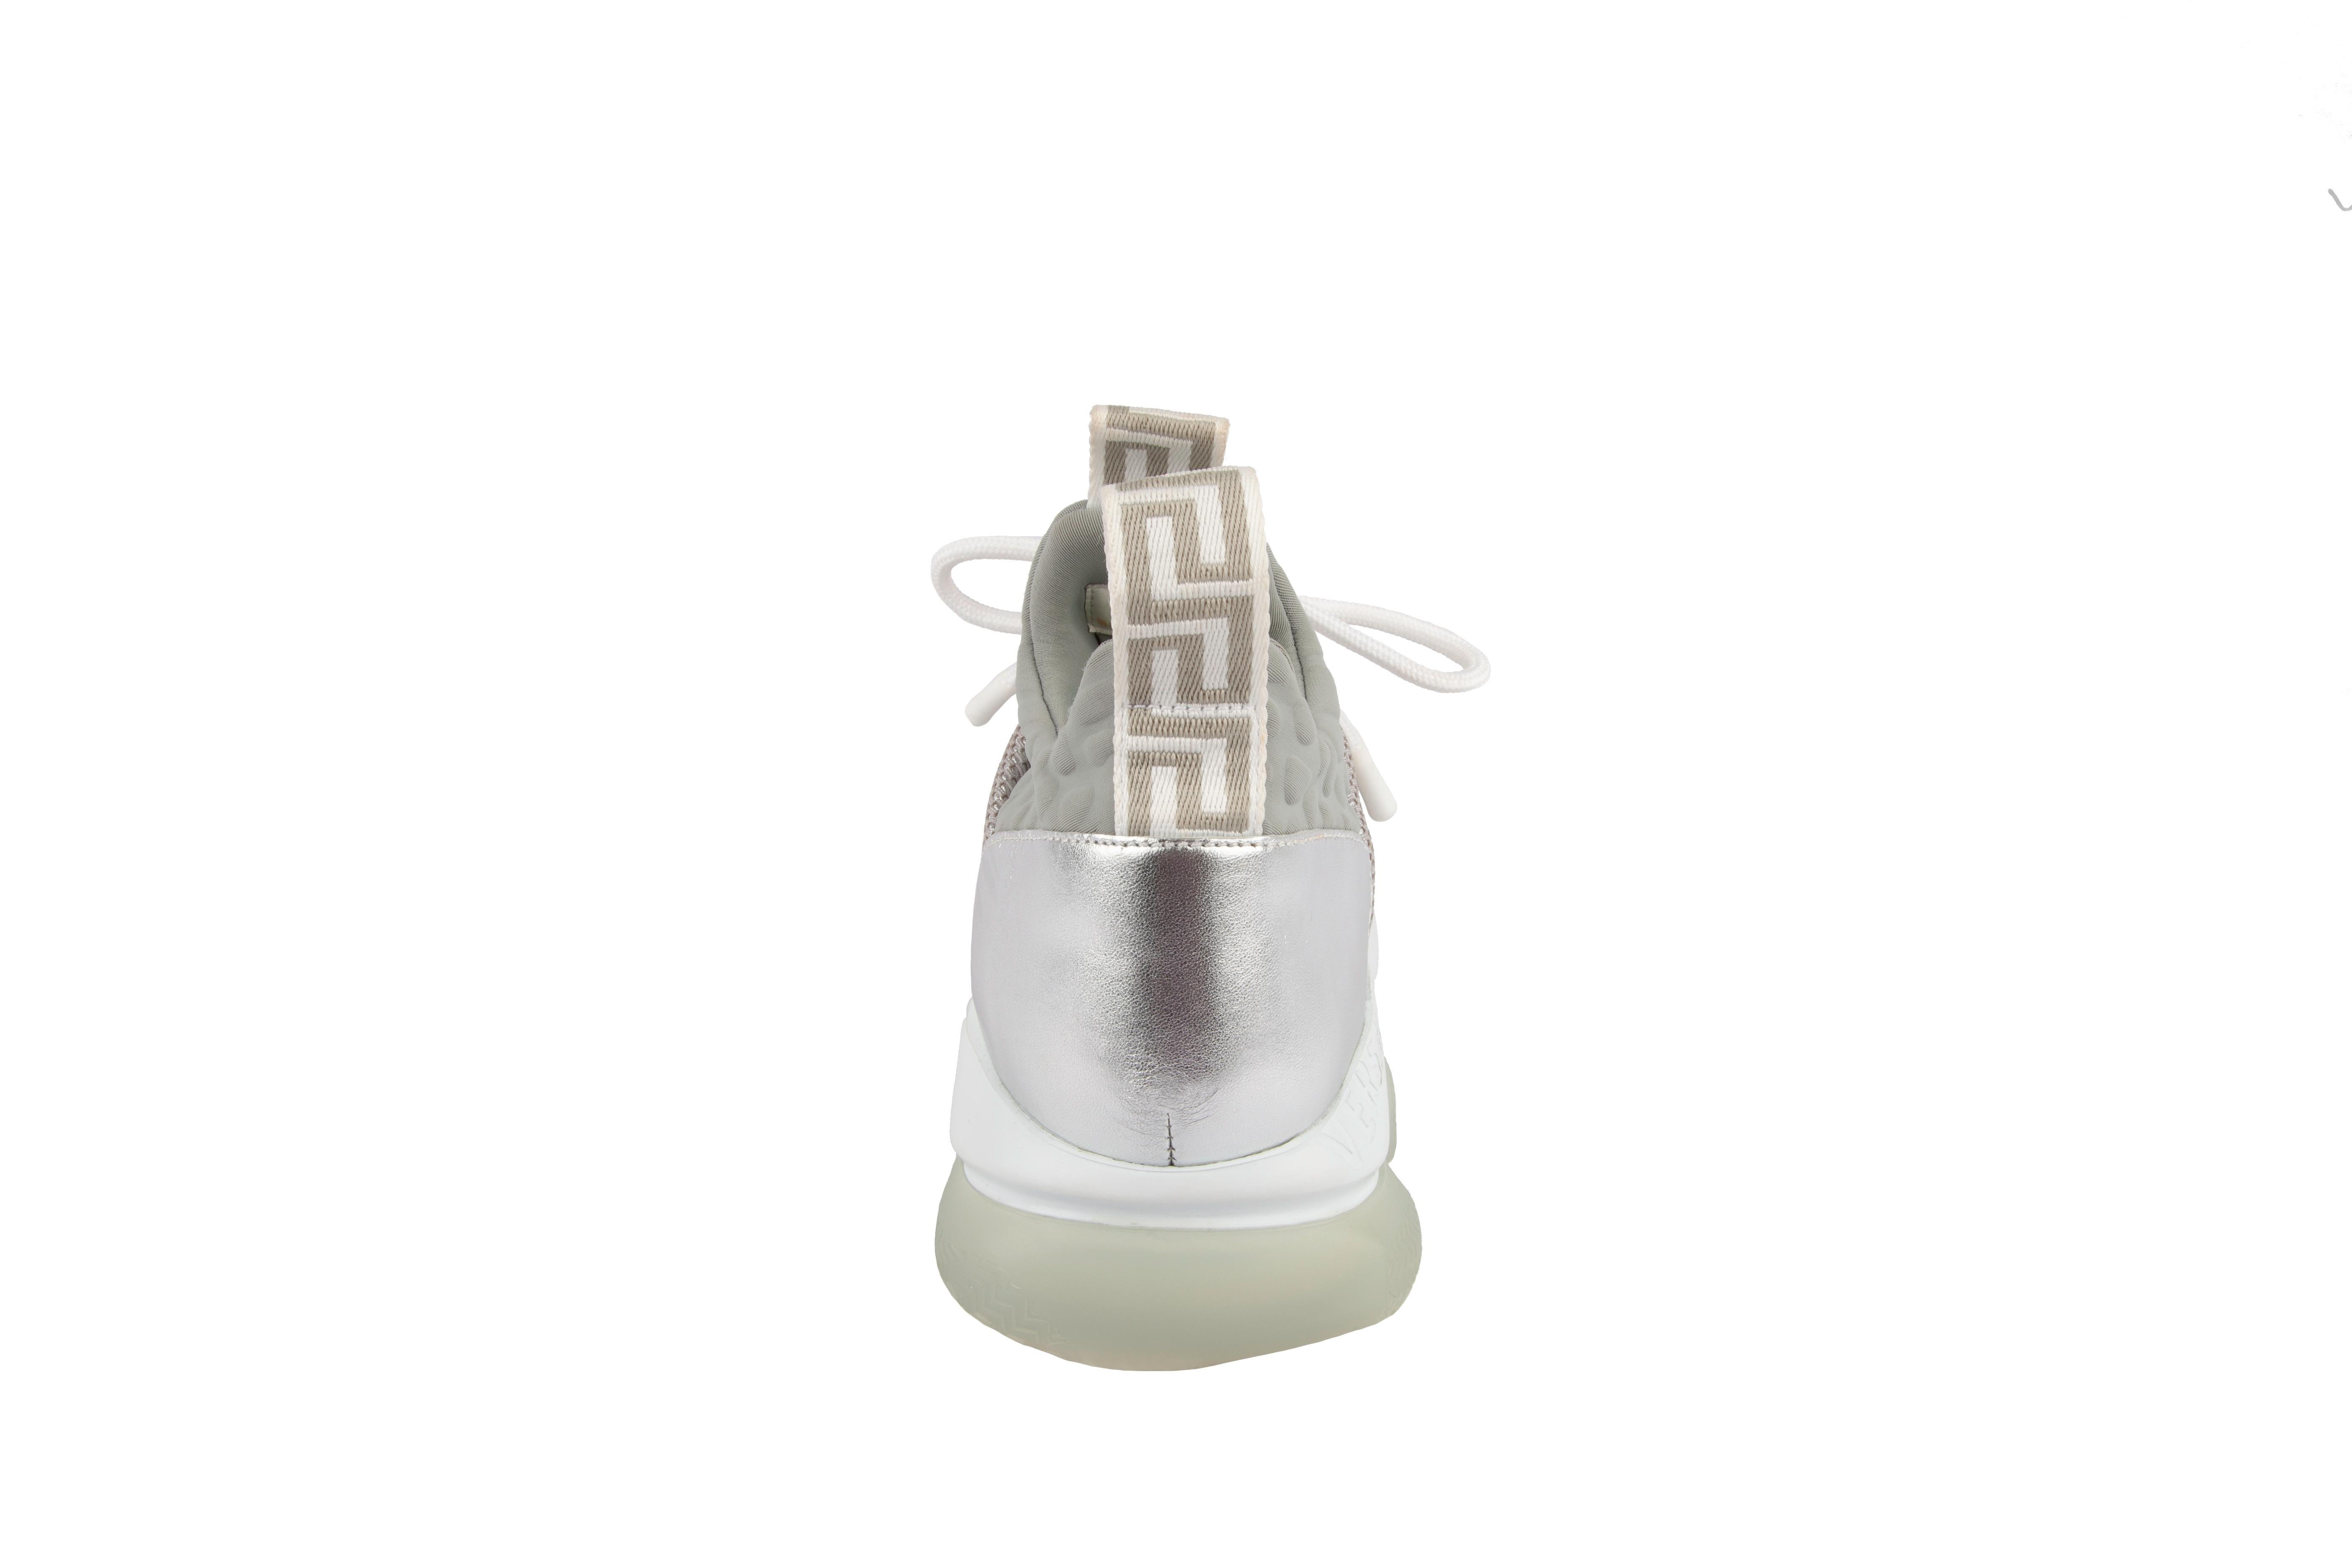 These Versace Cross Chainer silver sneakers feature puff-croc neoprene accents on the tongue and lining, a translucent glitter toe cap, and the defining chain link outsole. Versace’s Greca key pattern is stamped onto both pull tabs for branding,